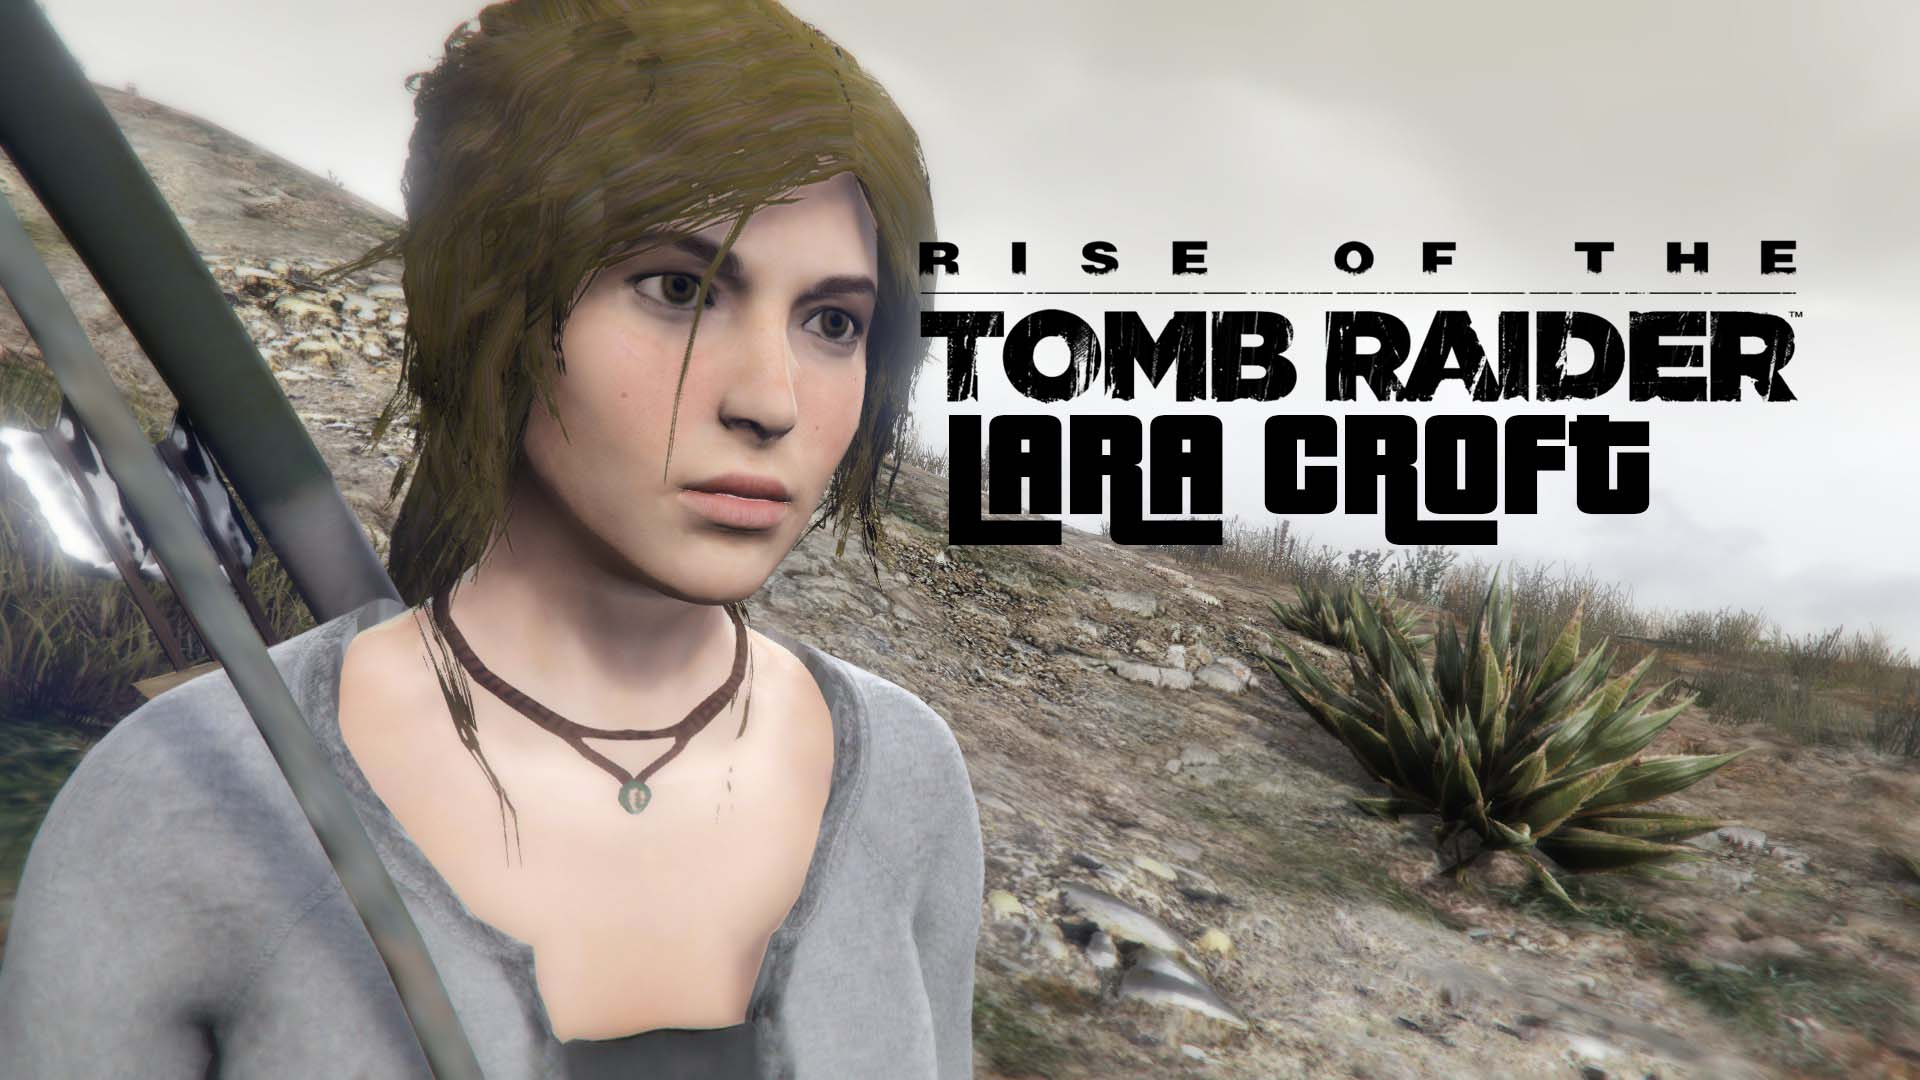 Face-Off: Rise of the Tomb Raider on PC